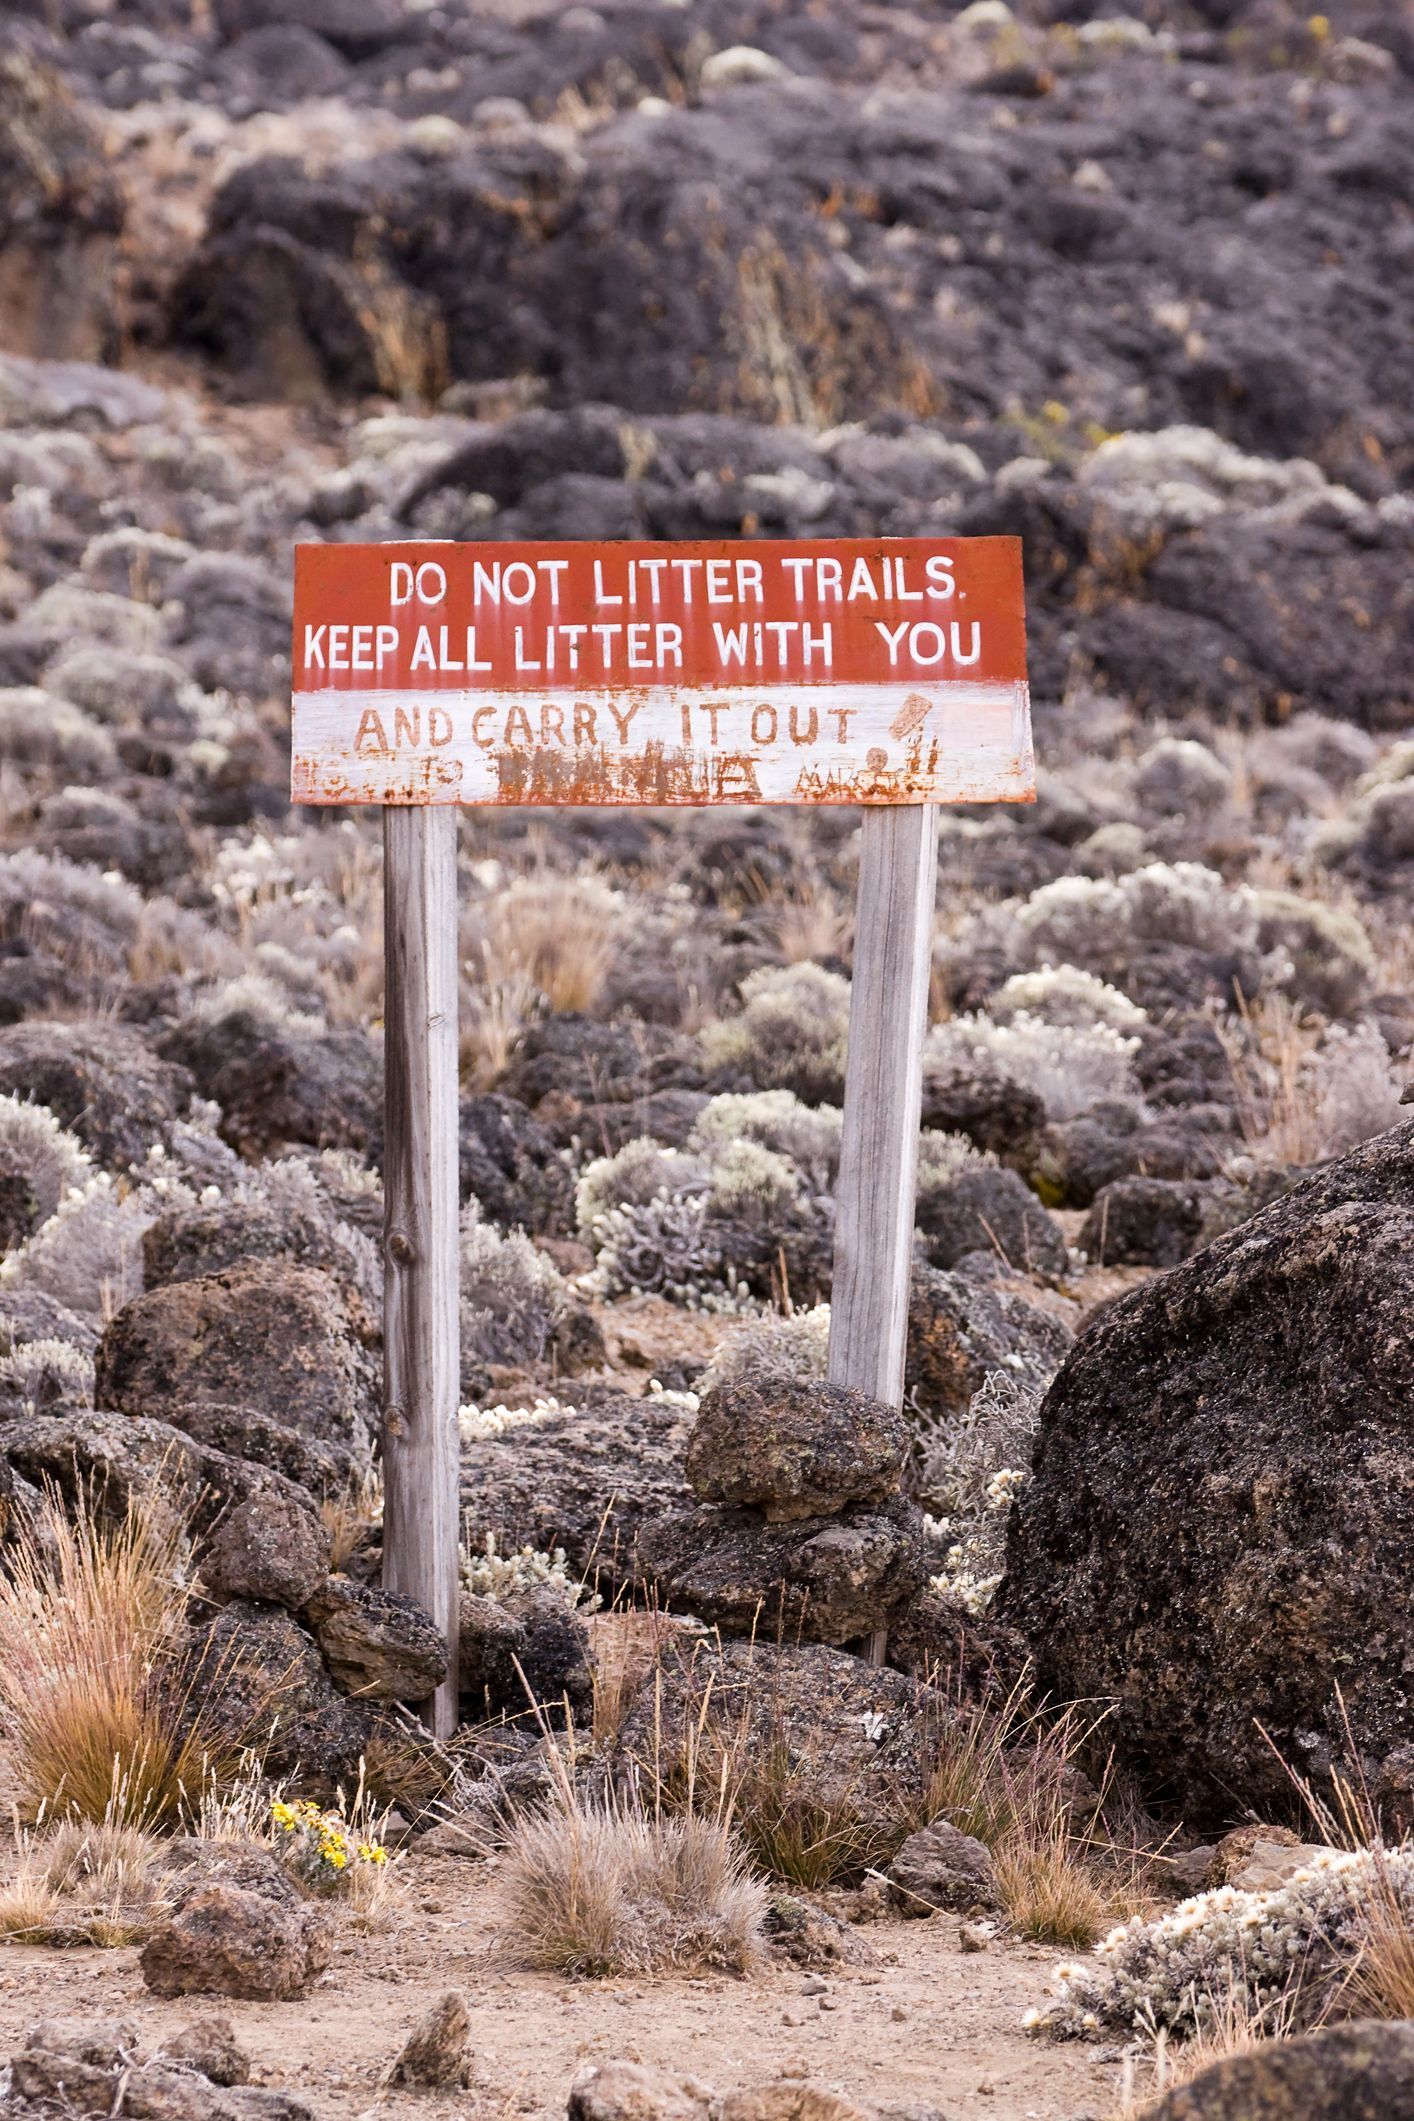 A sign in Kilimanjaro National Park which reads "do not litter trails."